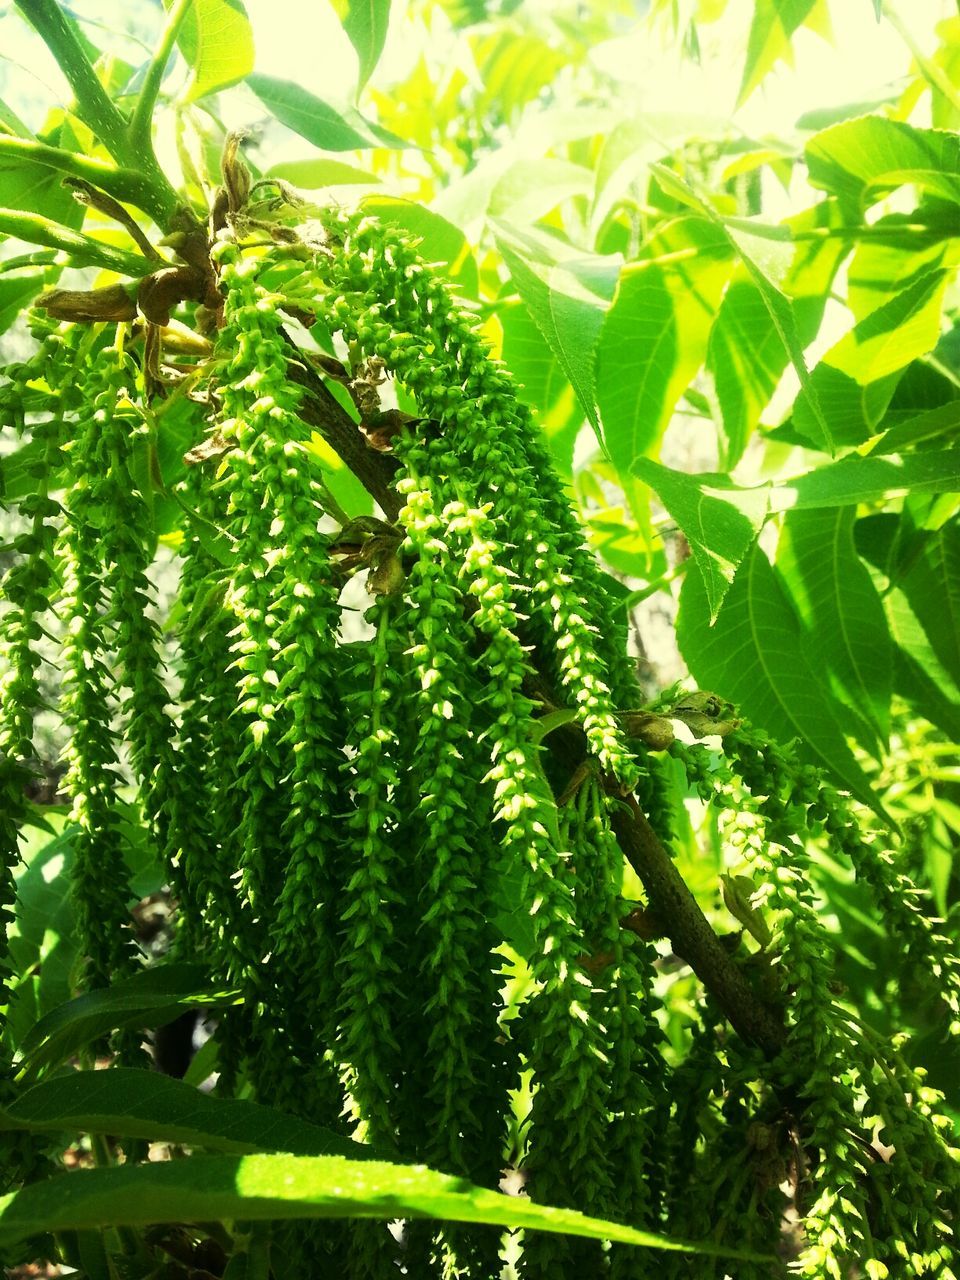 green color, growth, leaf, freshness, nature, plant, tree, close-up, beauty in nature, food and drink, growing, sunlight, green, agriculture, day, outdoors, tranquility, lush foliage, no people, branch